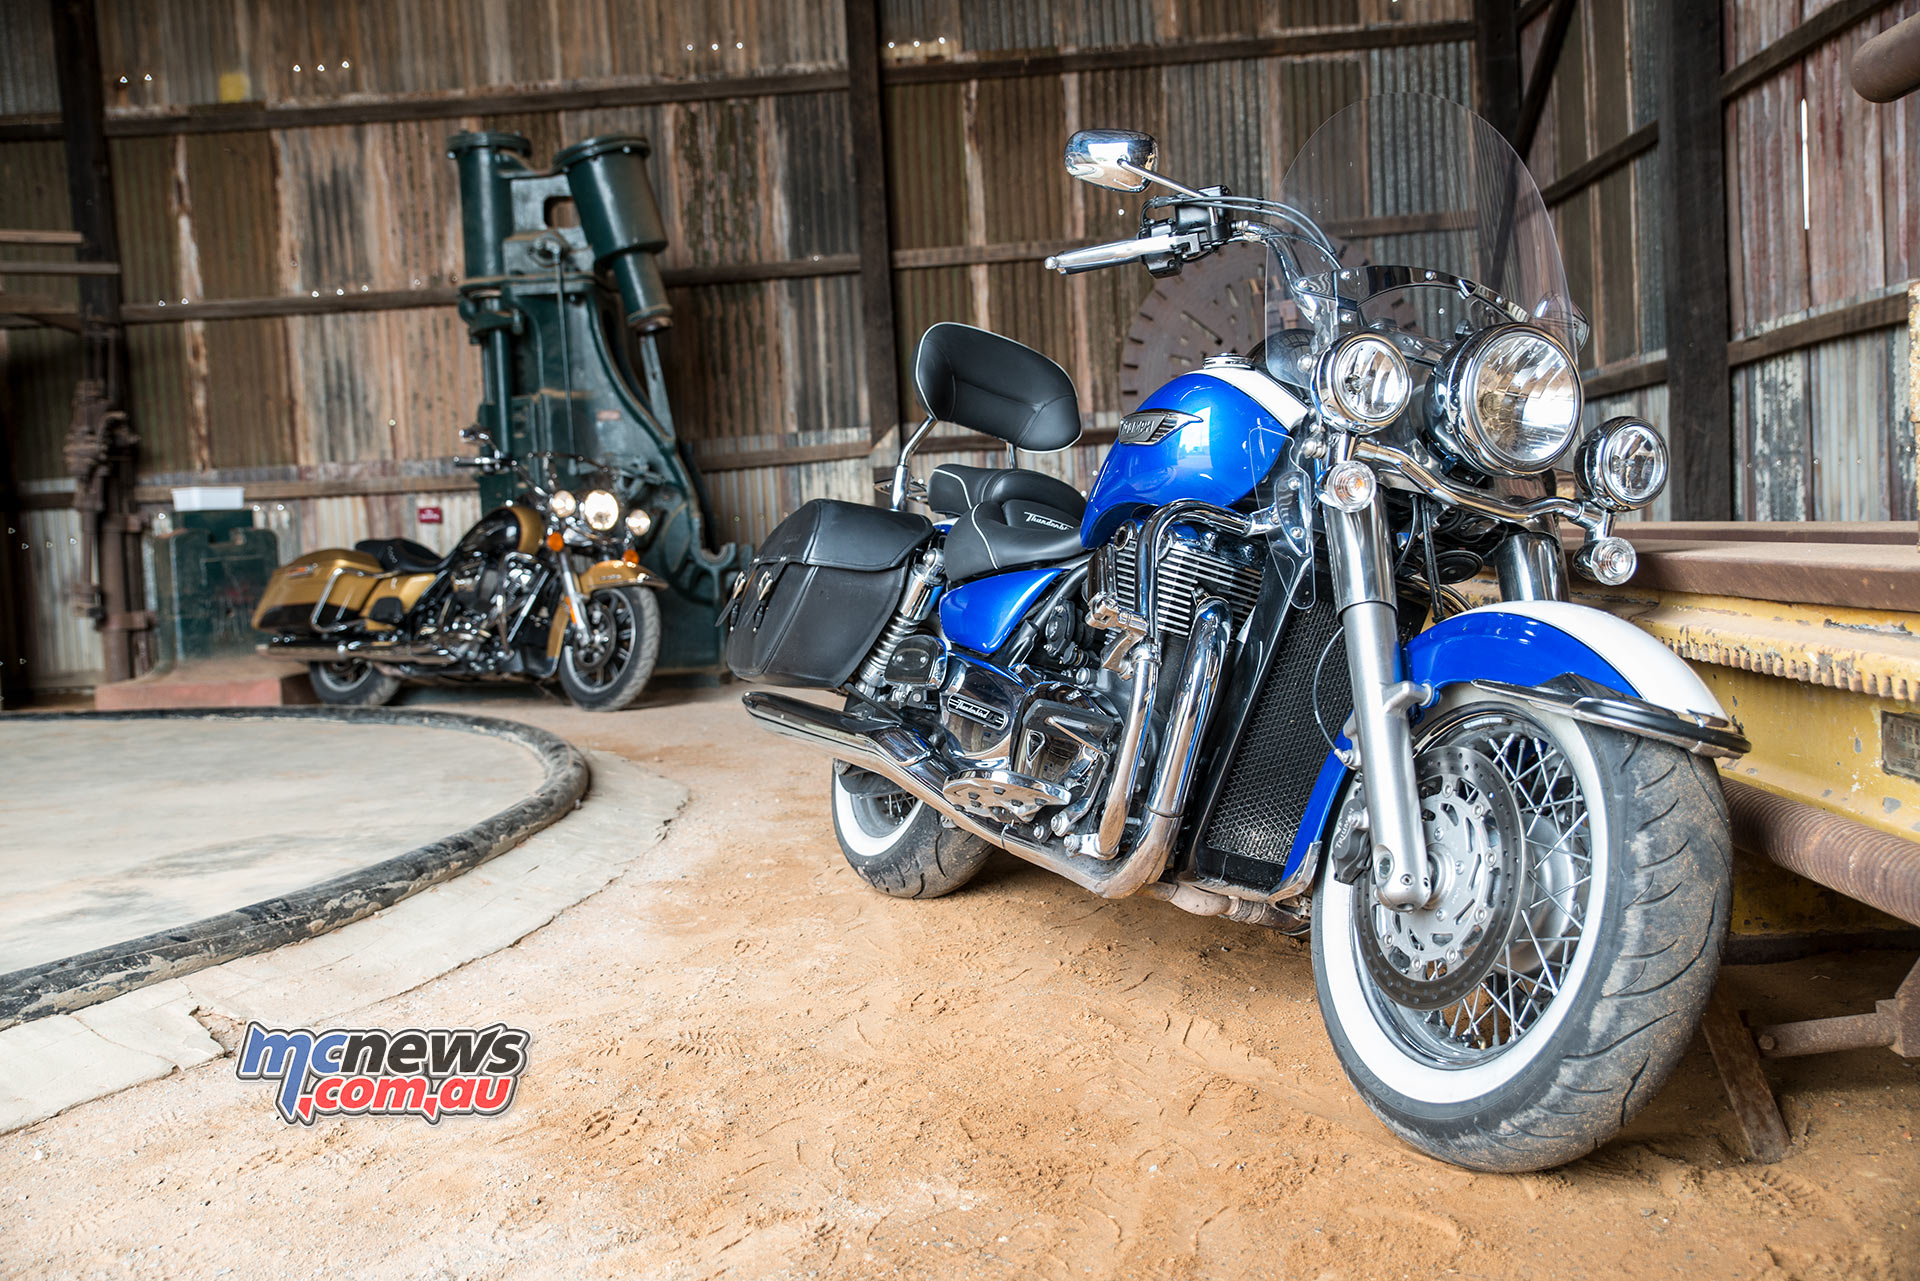 Triumph Thunderbird LT and Harley-Davidson Road King pictured at Hannans North Tourist Mine